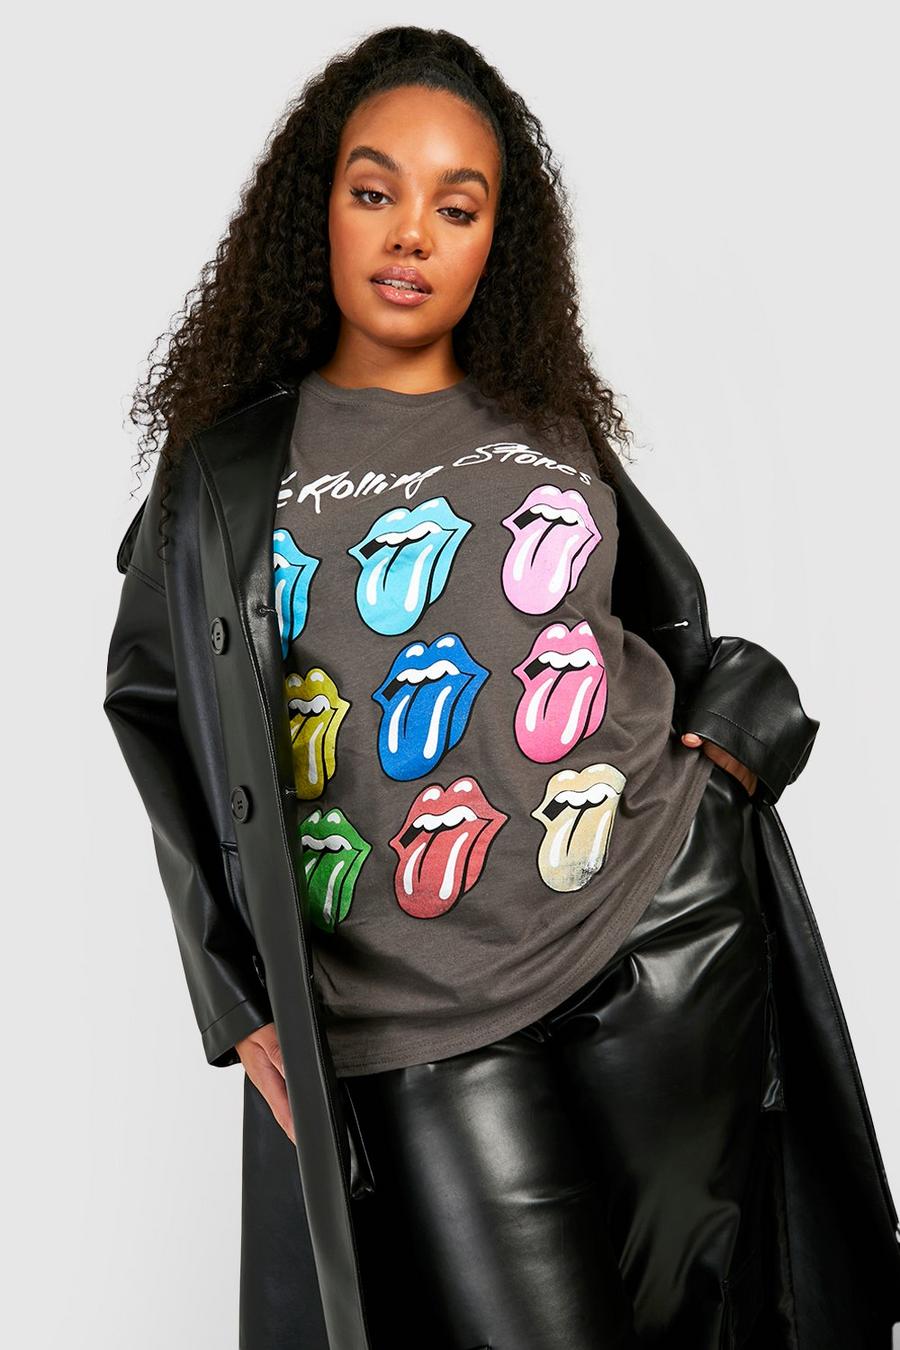 T-shirt Plus Size ufficiale Rolling Stones in colori arcobaleno, Charcoal gris